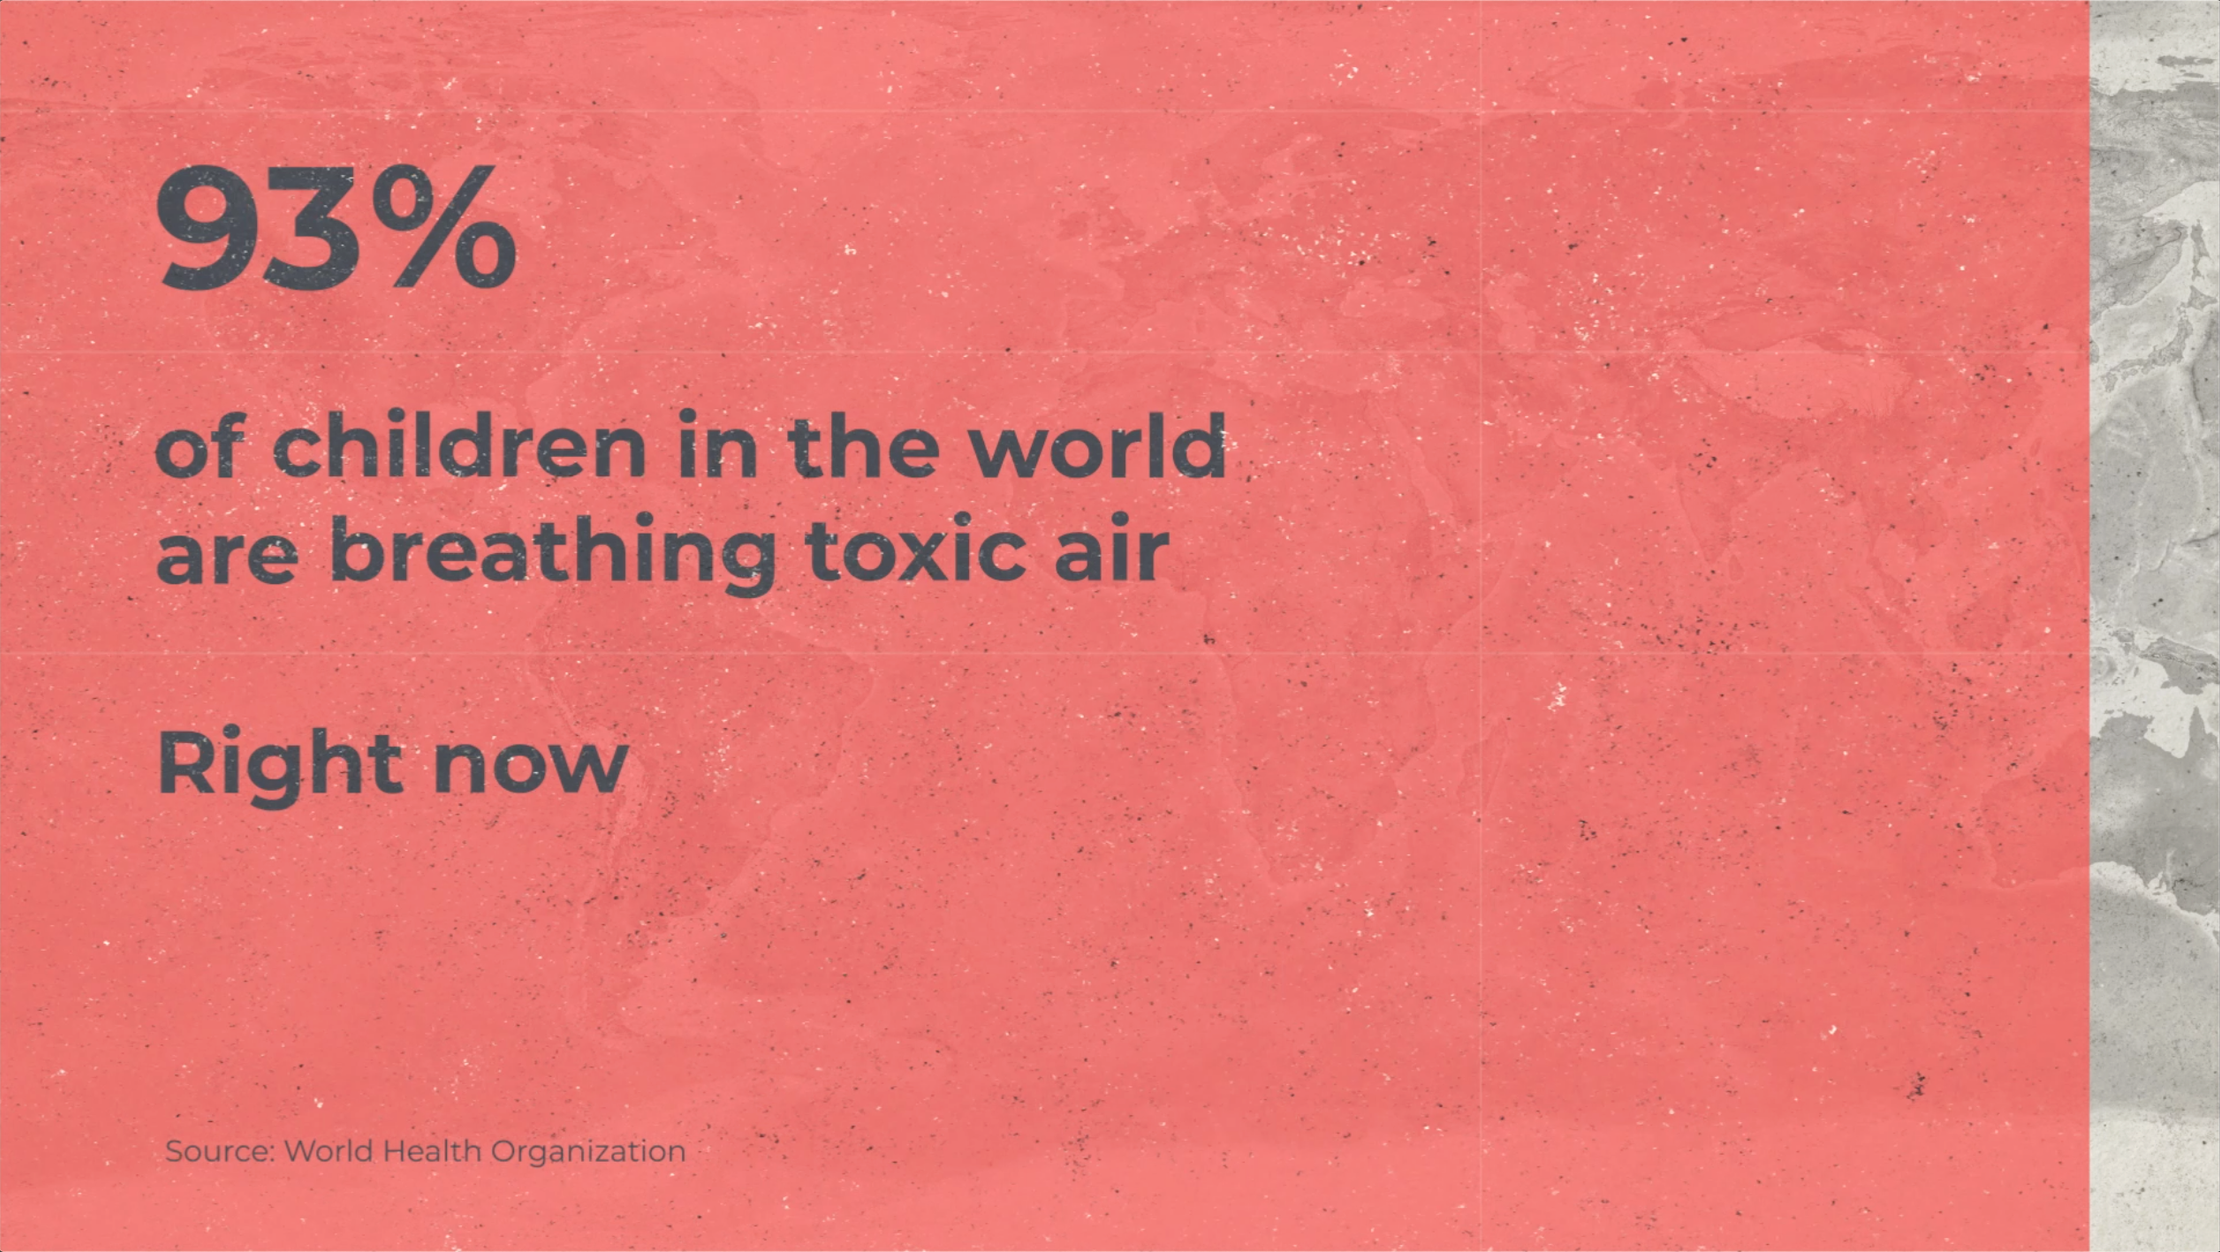 A still from the This is Ella video with text that reads '93% of children in the world are breathing toxic air right now'. The source is the World Health Organization.